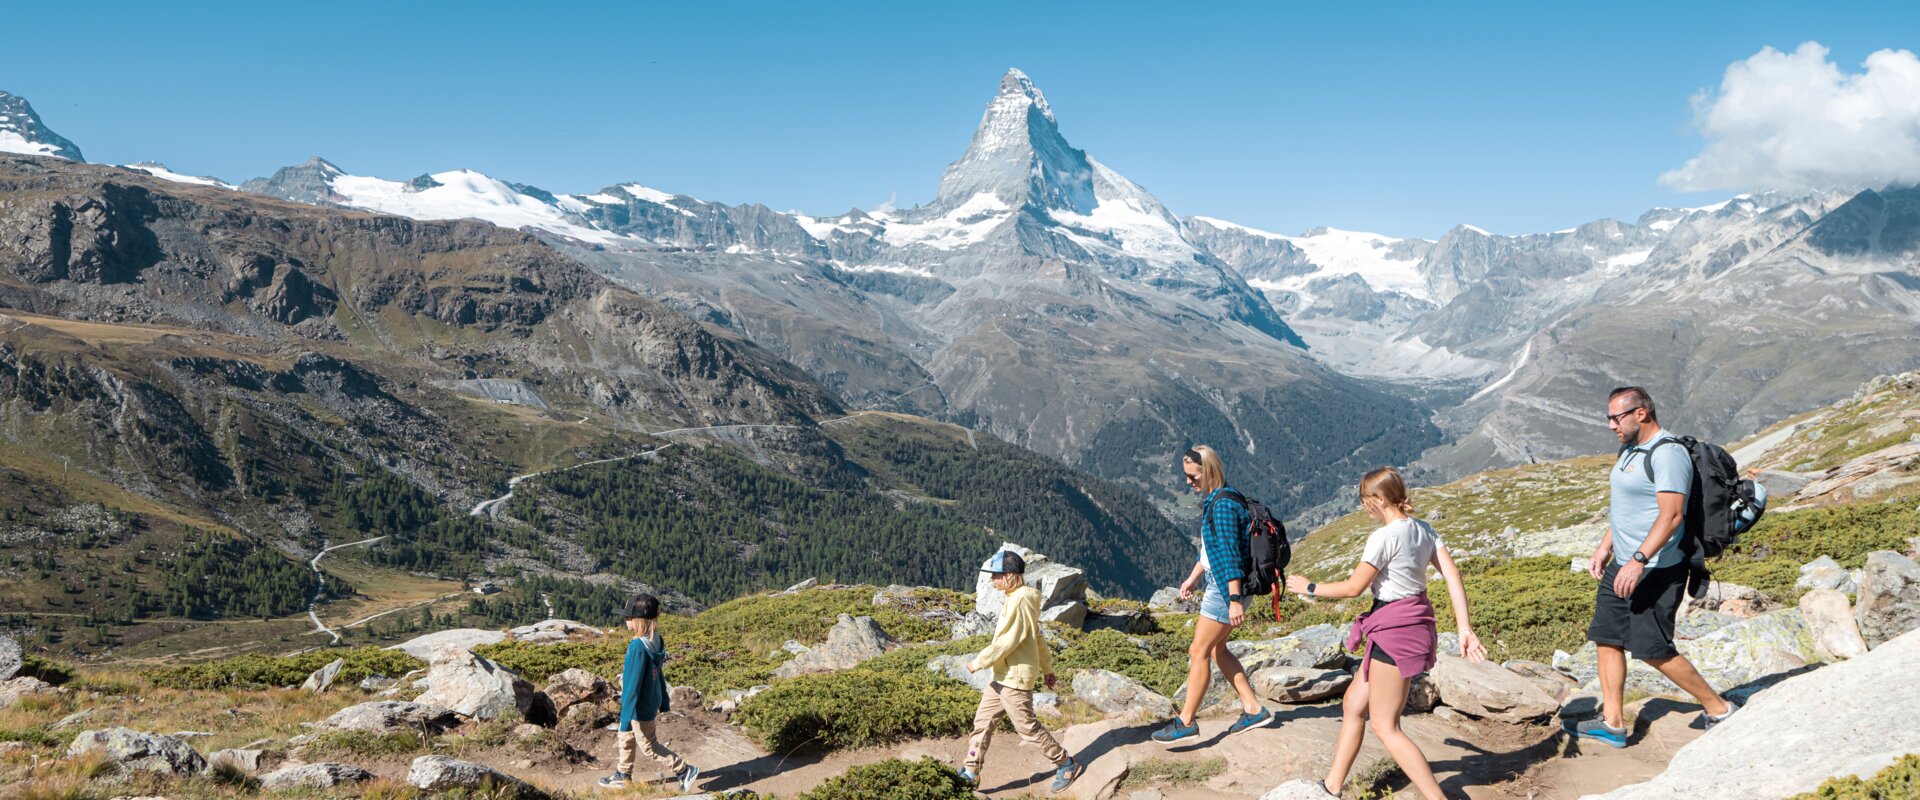 A family hikes amidst the fauna and flora of Zermatt | © Basic Home Production 